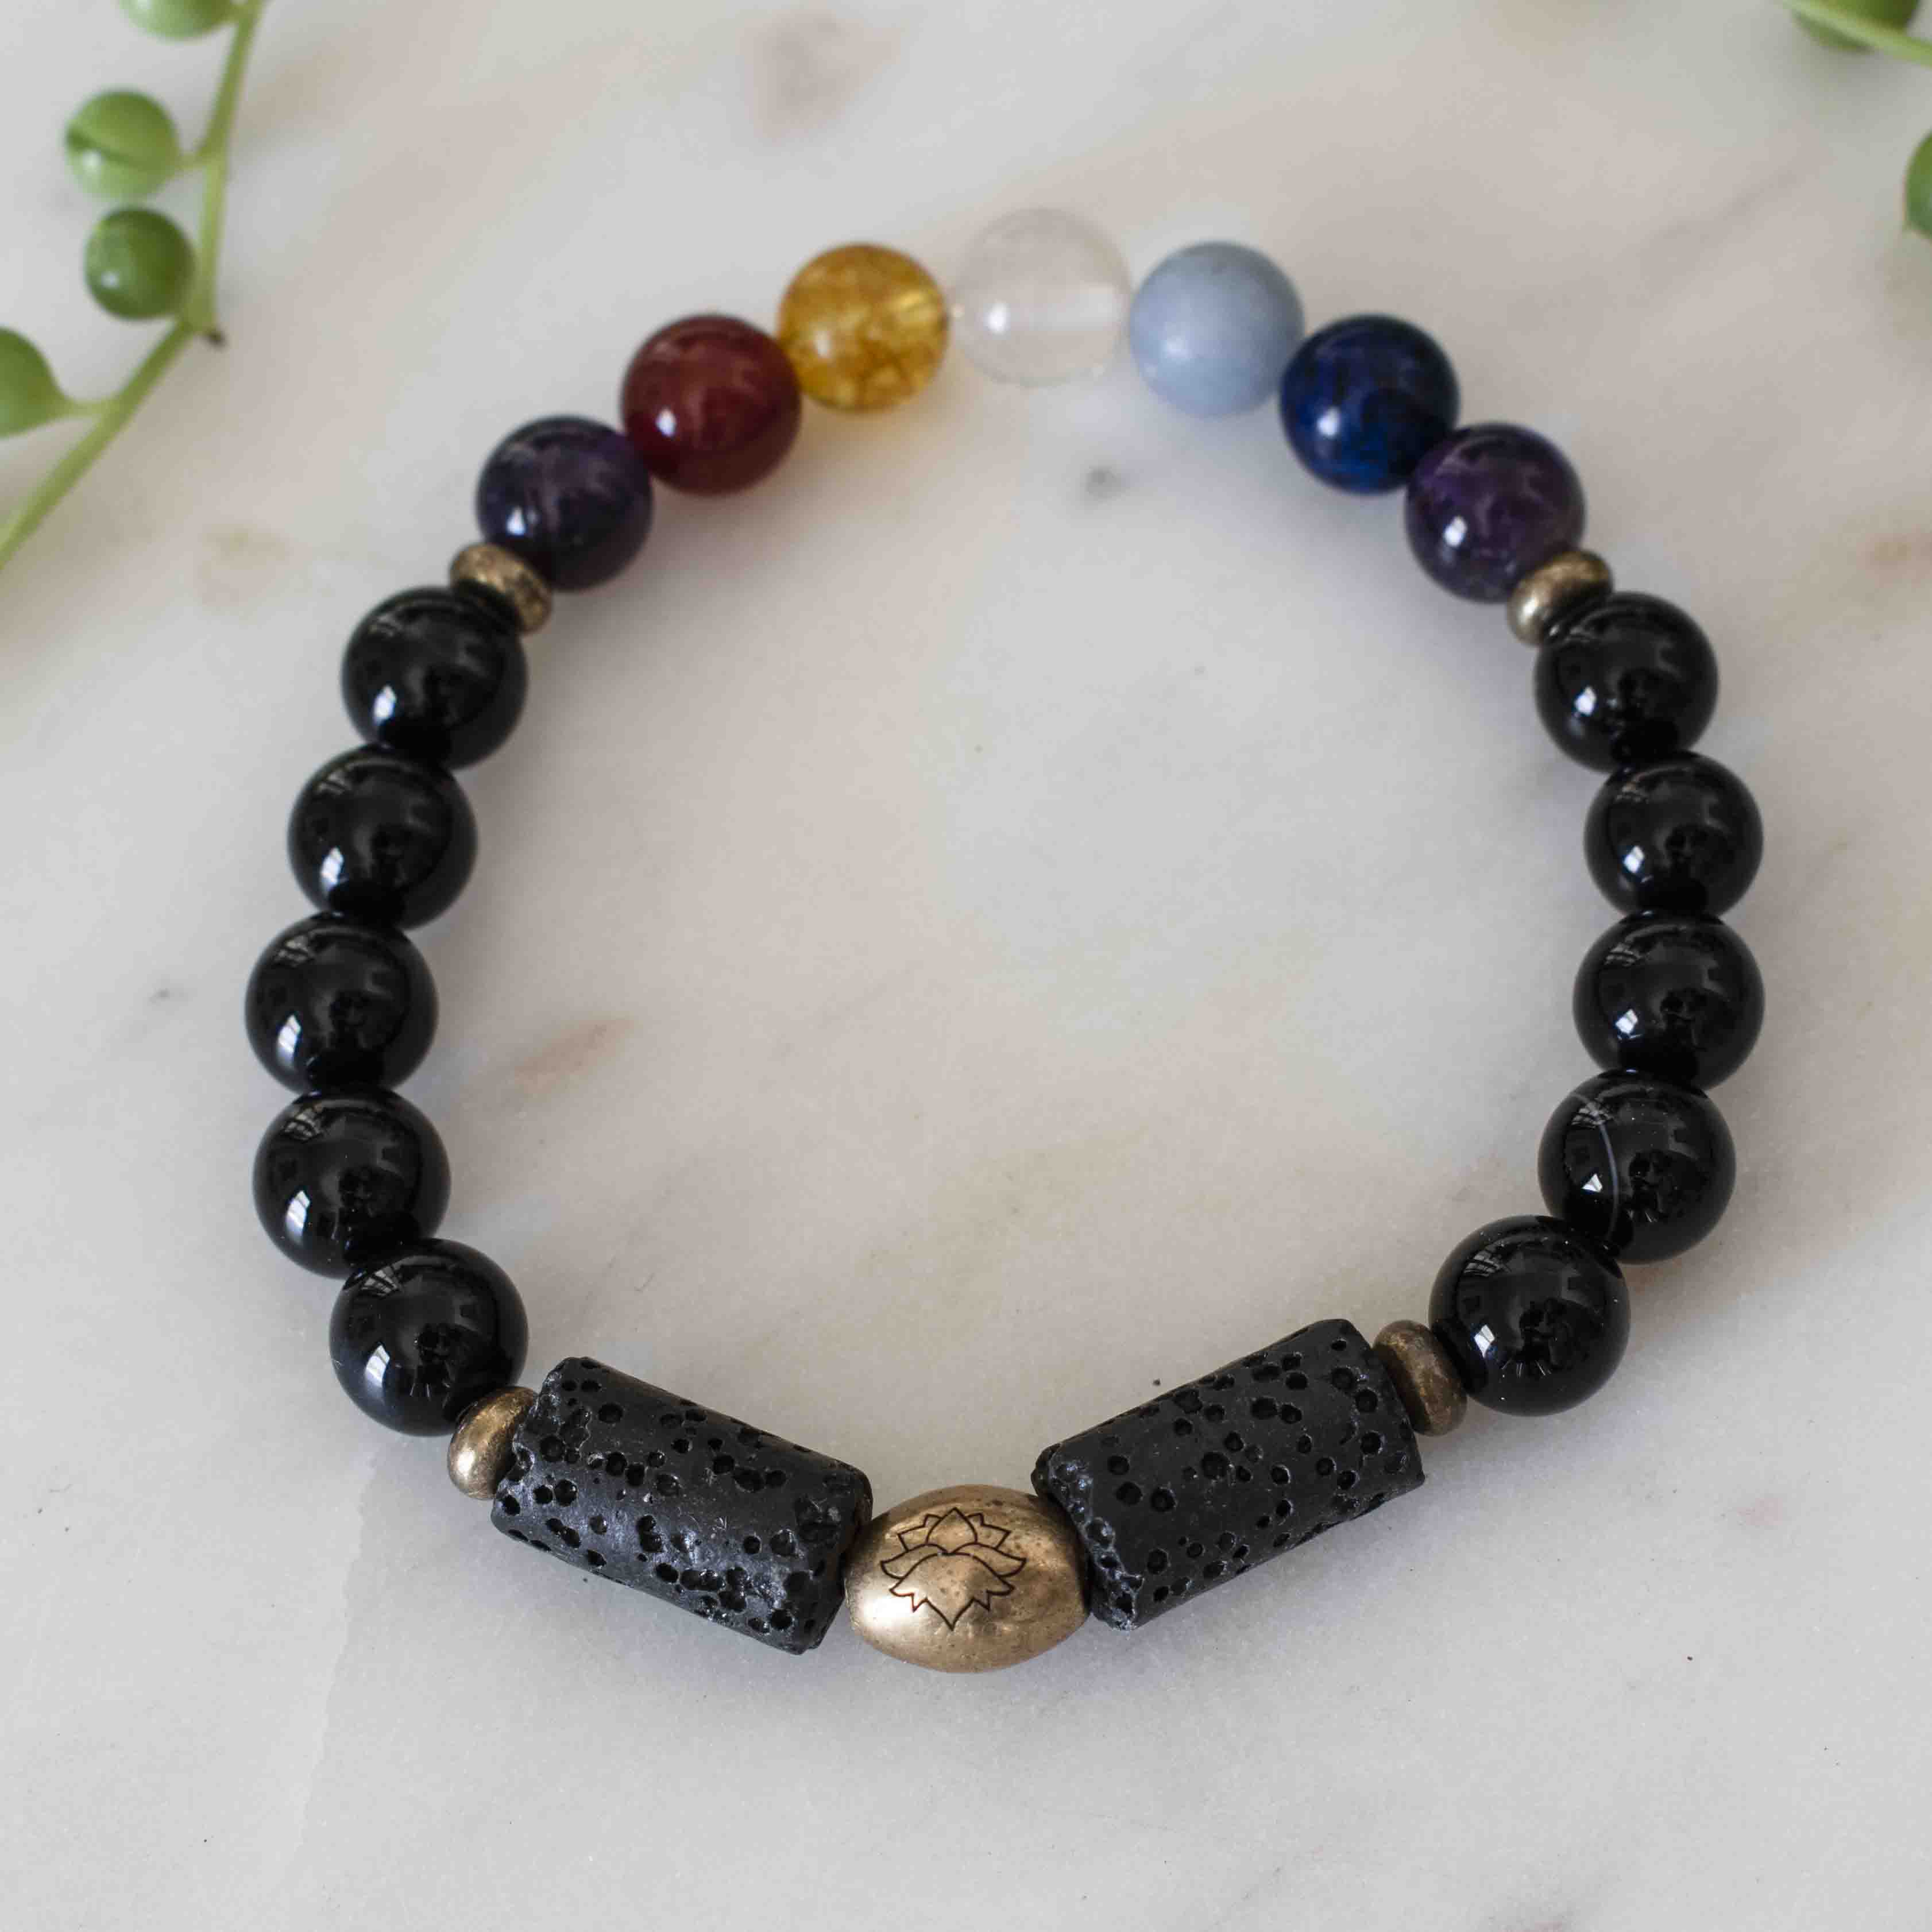 Chakra Yoga Charmed Aroma Bracelet For Women And Men Healing Lava Rock With  Natural Stones From Wishlove7878, $1.01 | DHgate.Com